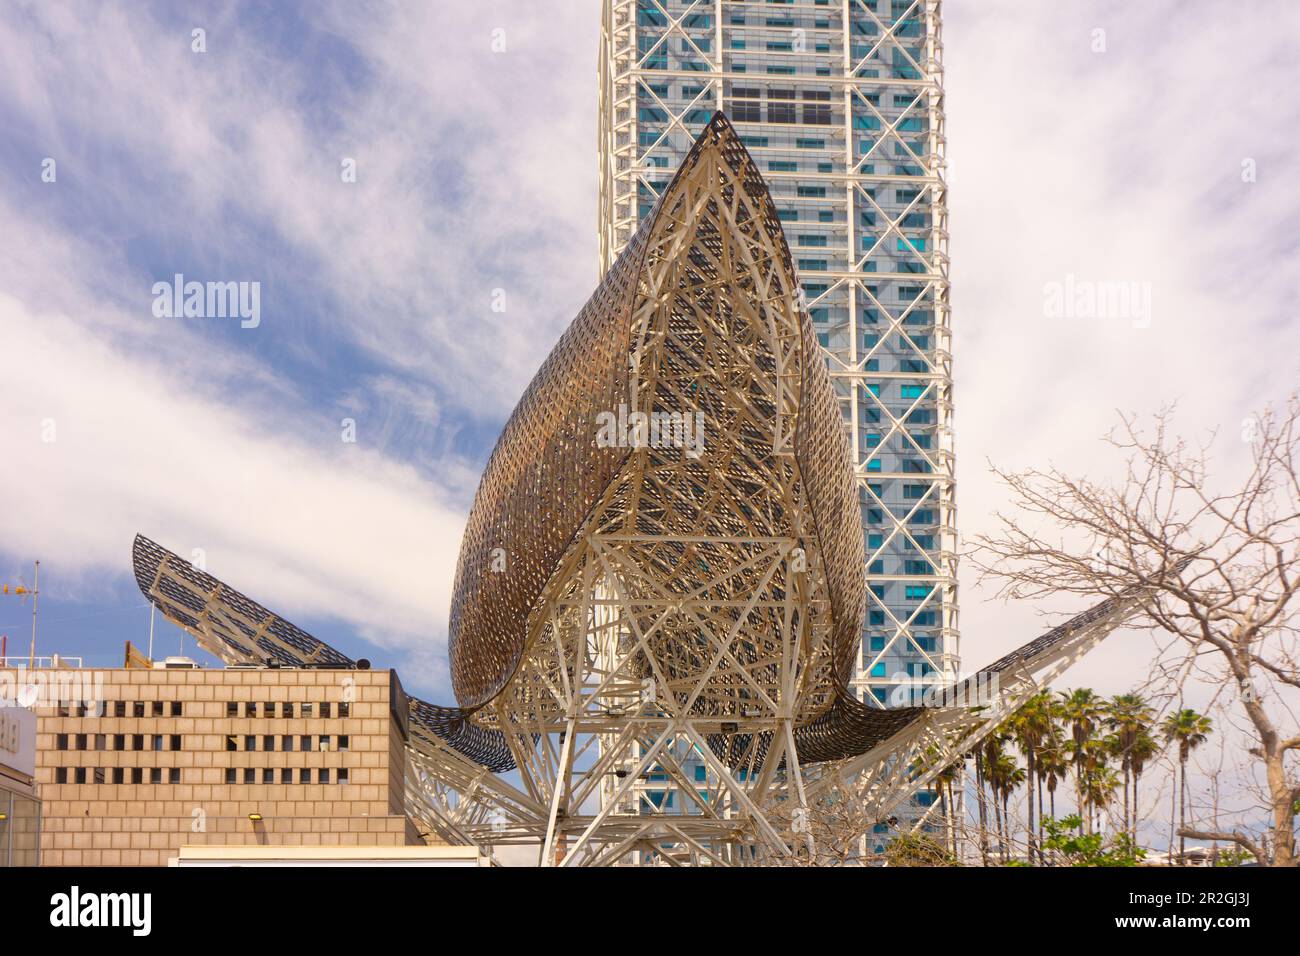 Gehery-designed gold fish pavilion, now a casino, near Olympic village.  Barcelona, Spain. Stock Photo